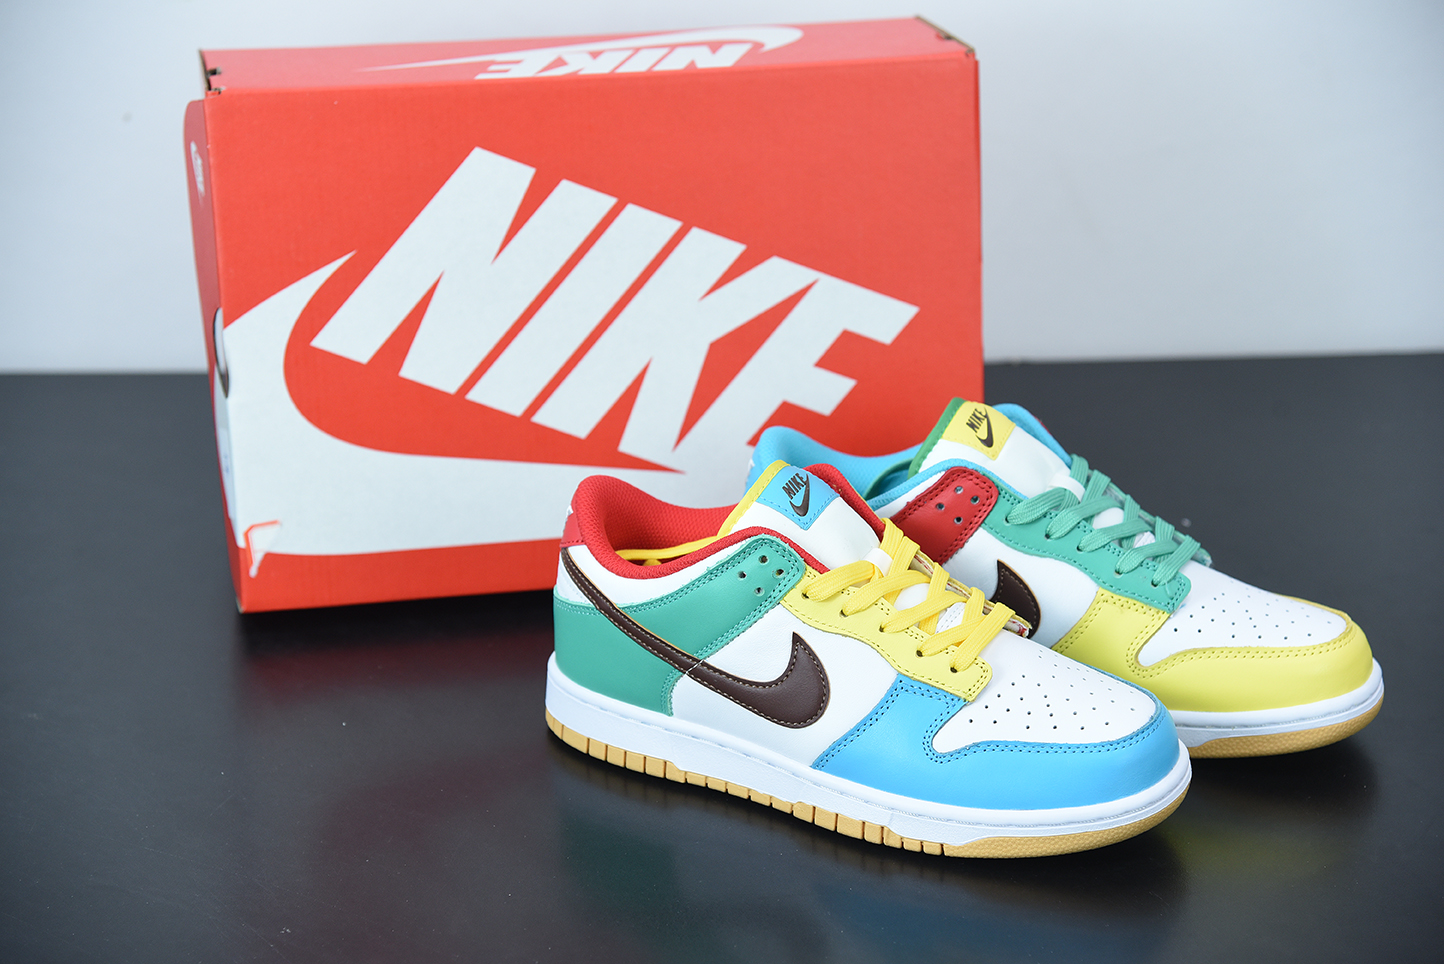 Nike Dunk Low SE “Free 99” White/Light Chocolate-Roma Green For 